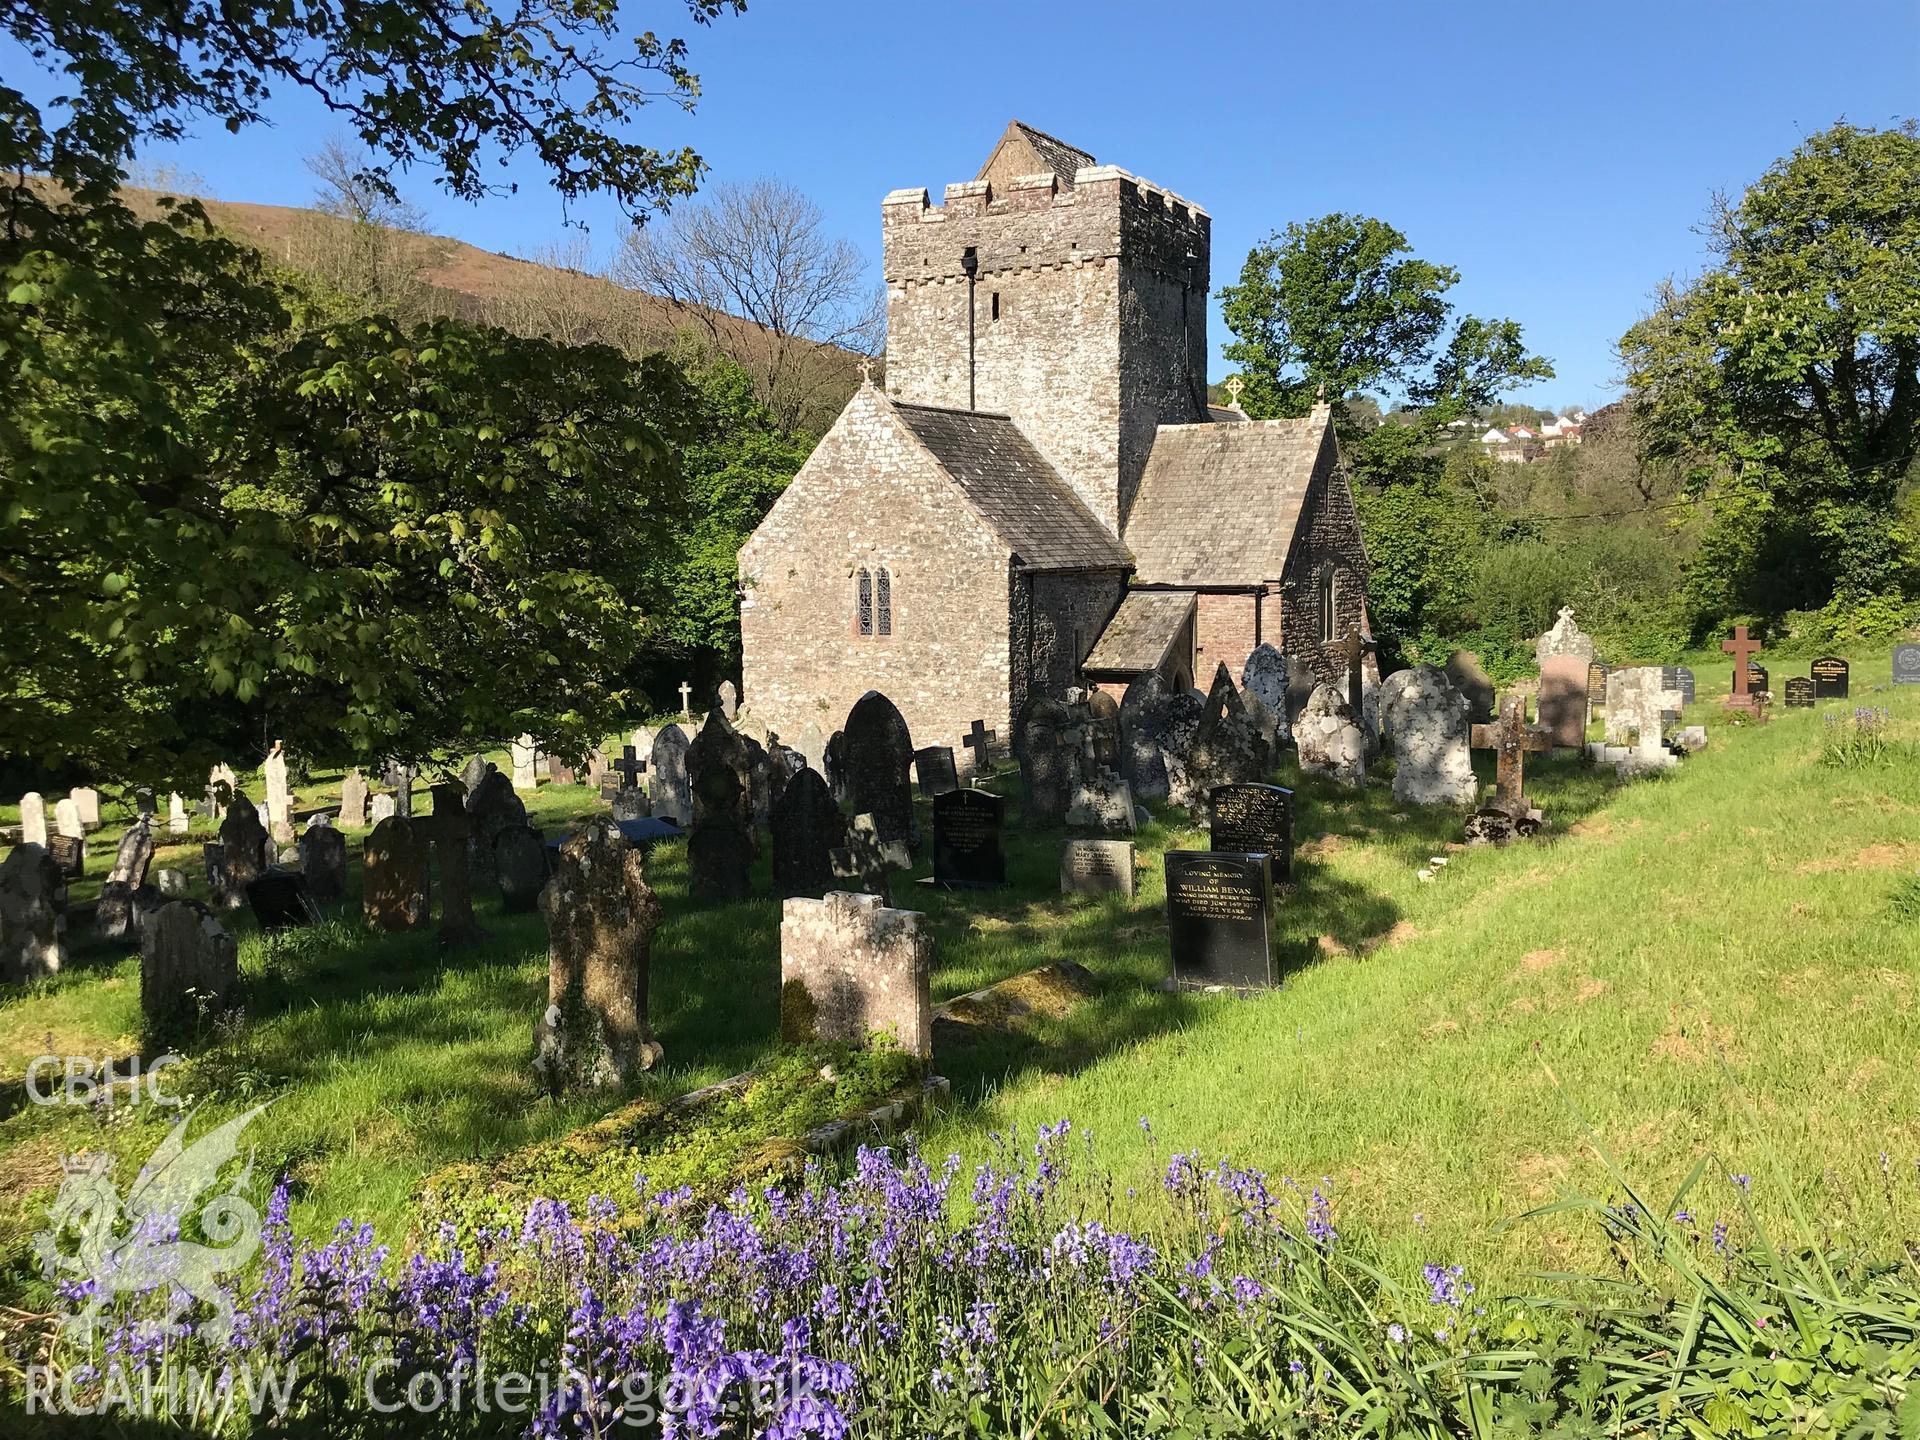 Digital colour photograph showing exterior view of St. Cadog's Church and graveyard, Cheriton, taken by Paul R. Davis on 5th May 2019.